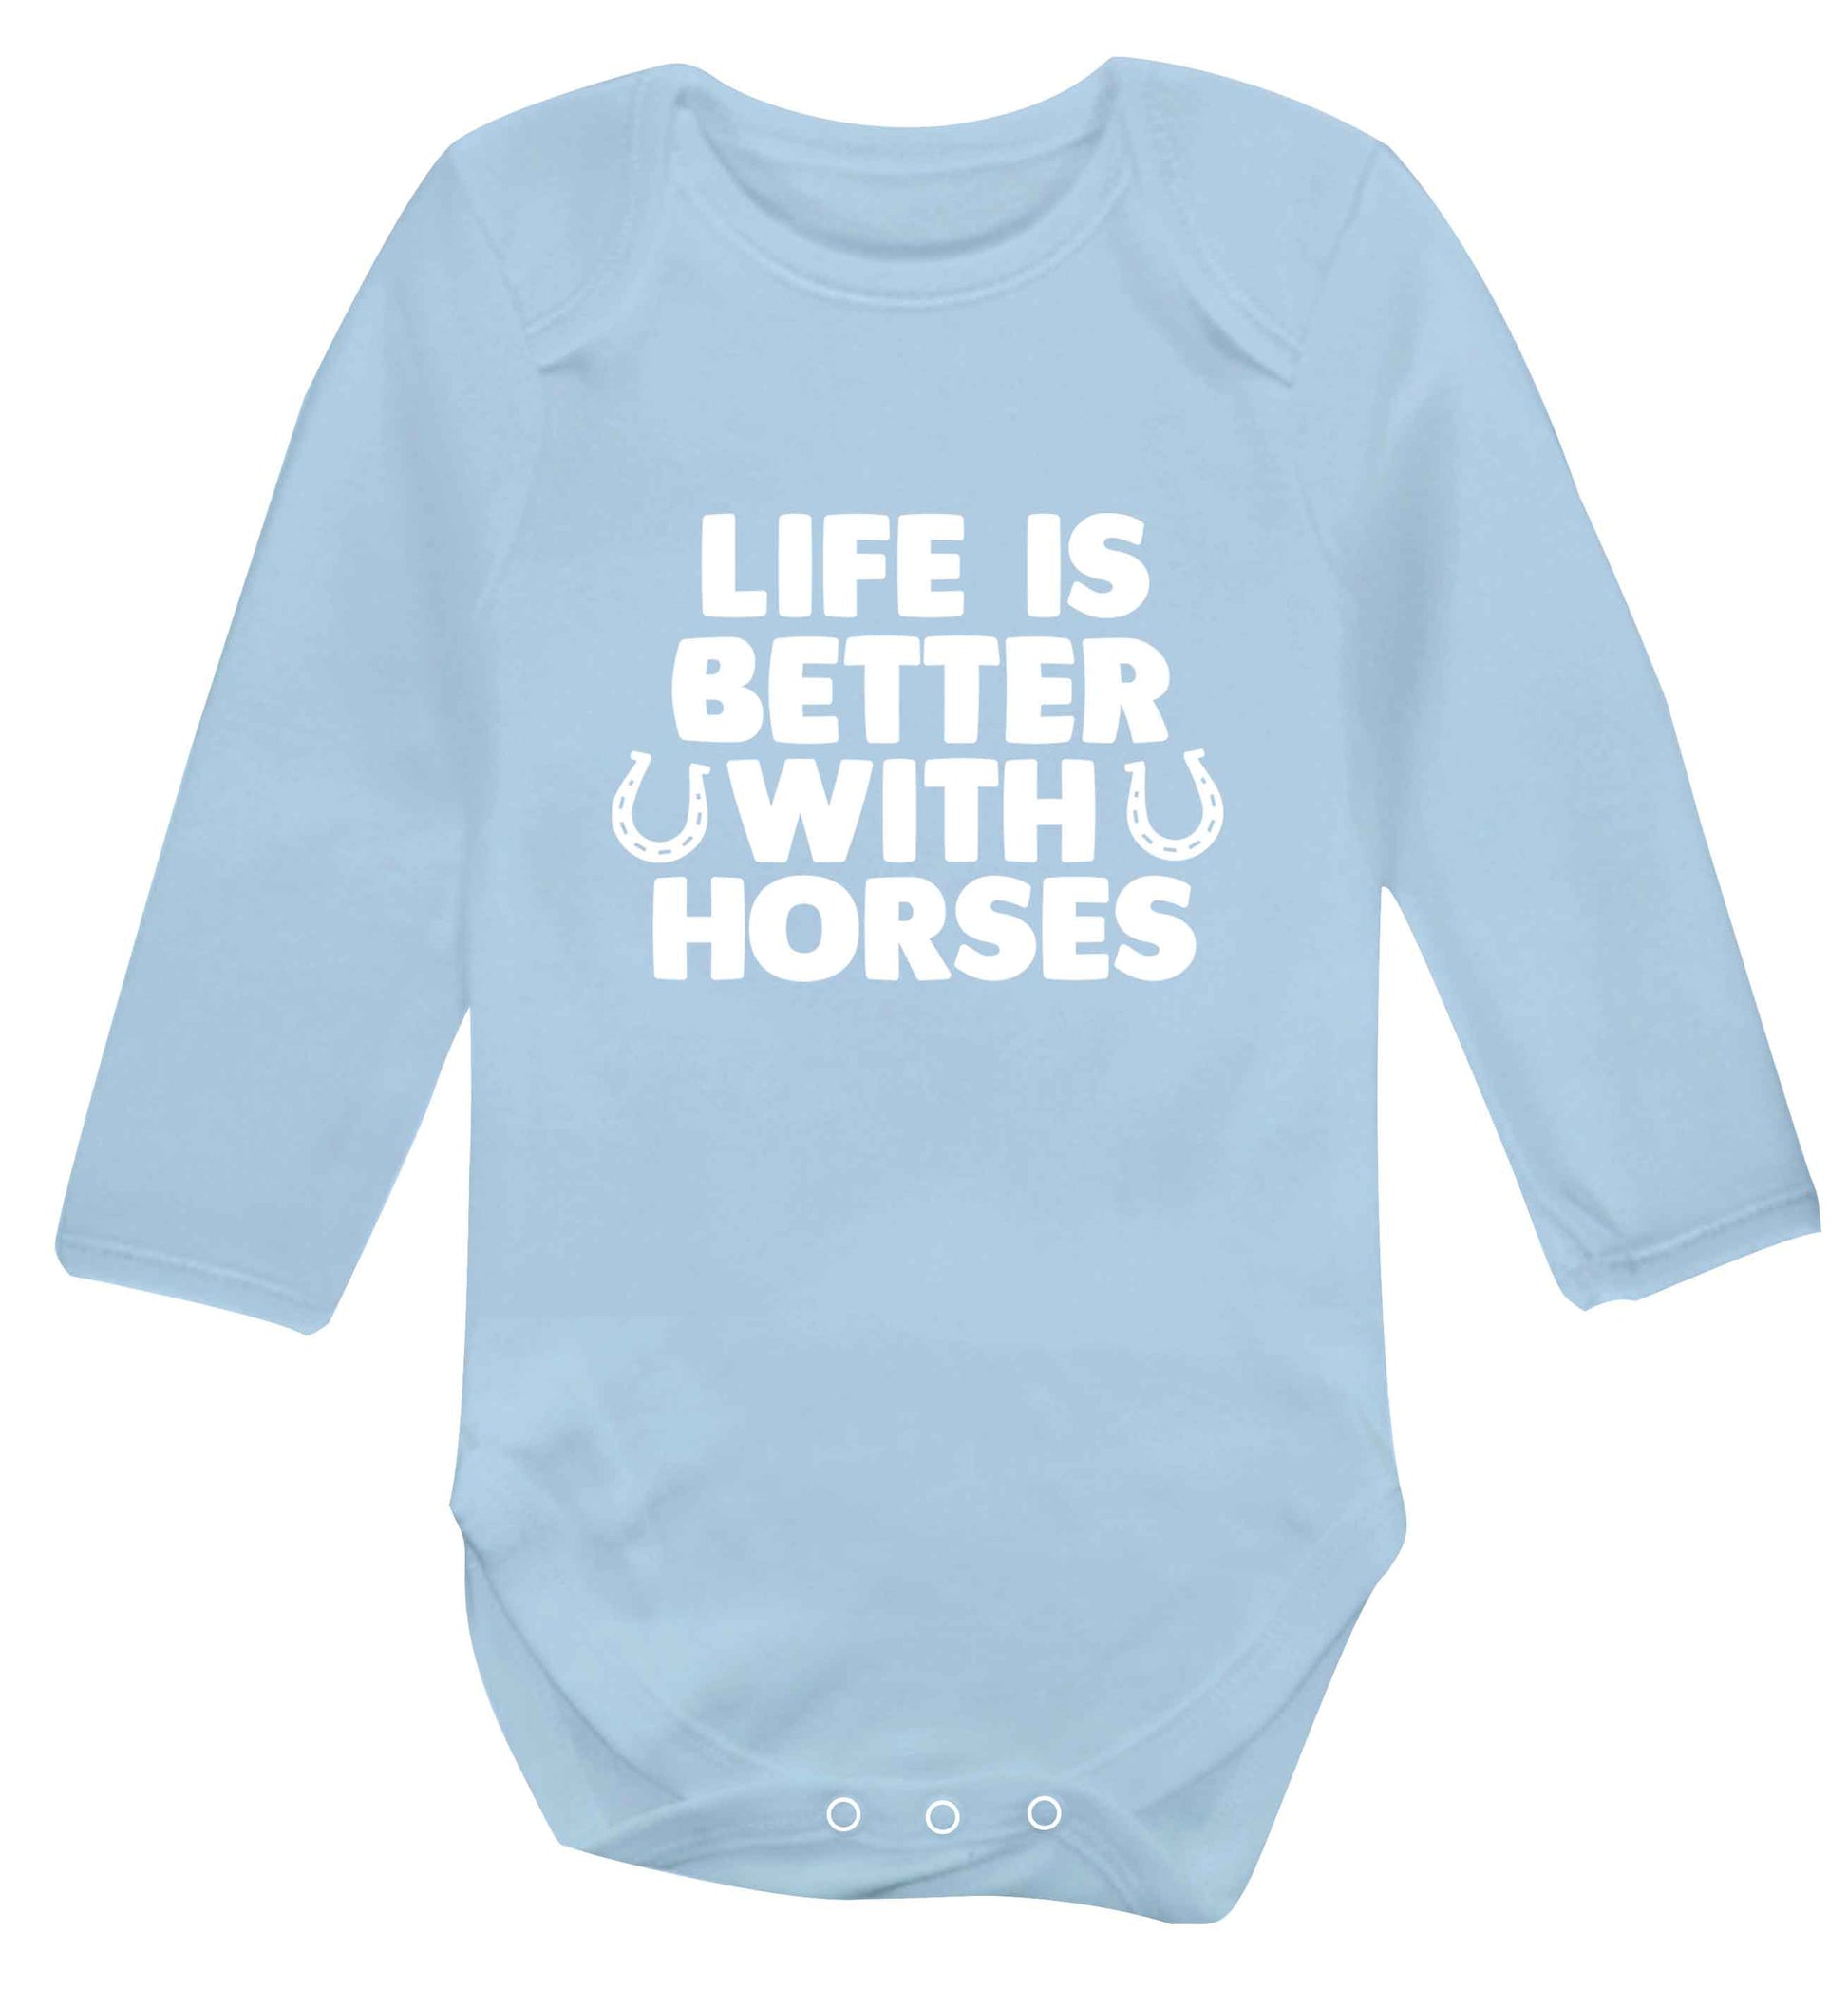 Life is better with horses baby vest long sleeved pale blue 6-12 months